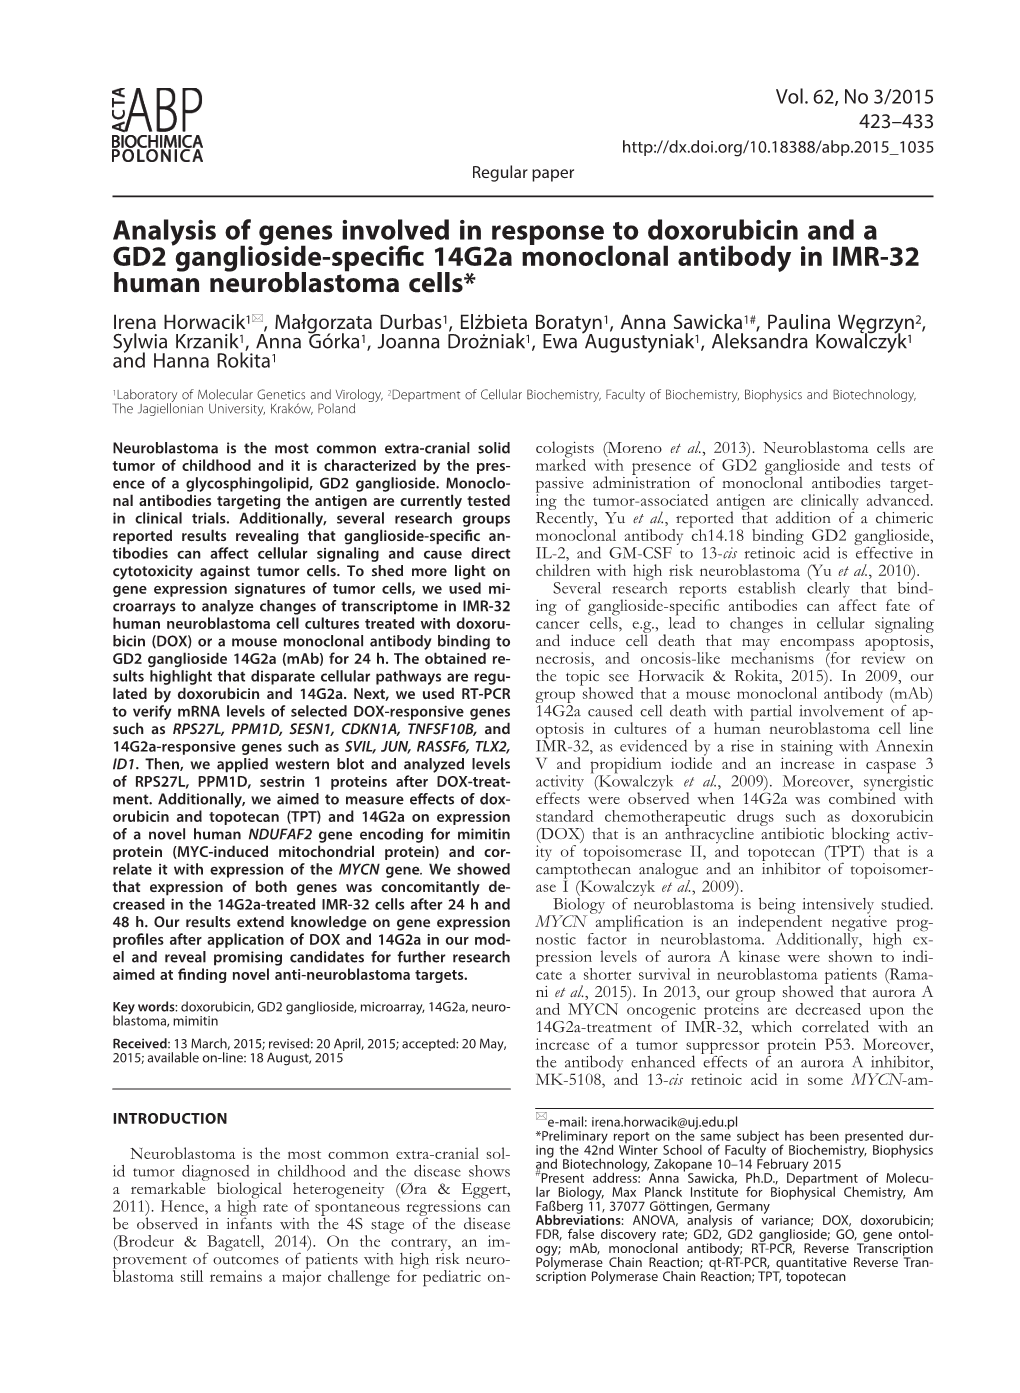 Analysis of Genes Involved in Response to Doxorubicin and a GD2